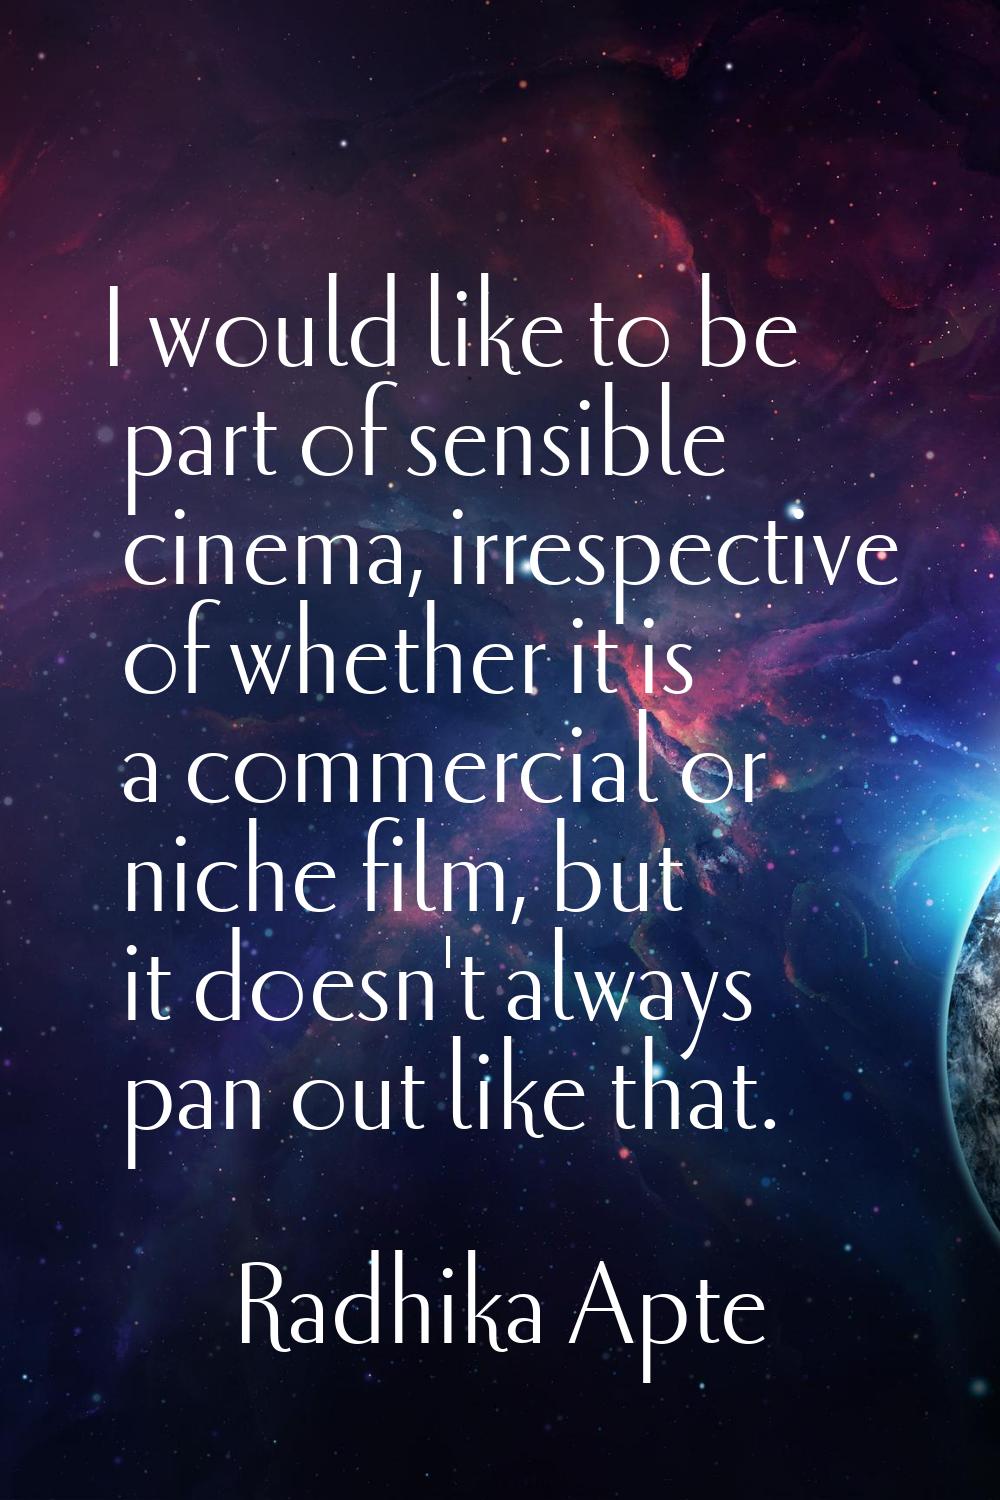 I would like to be part of sensible cinema, irrespective of whether it is a commercial or niche fil